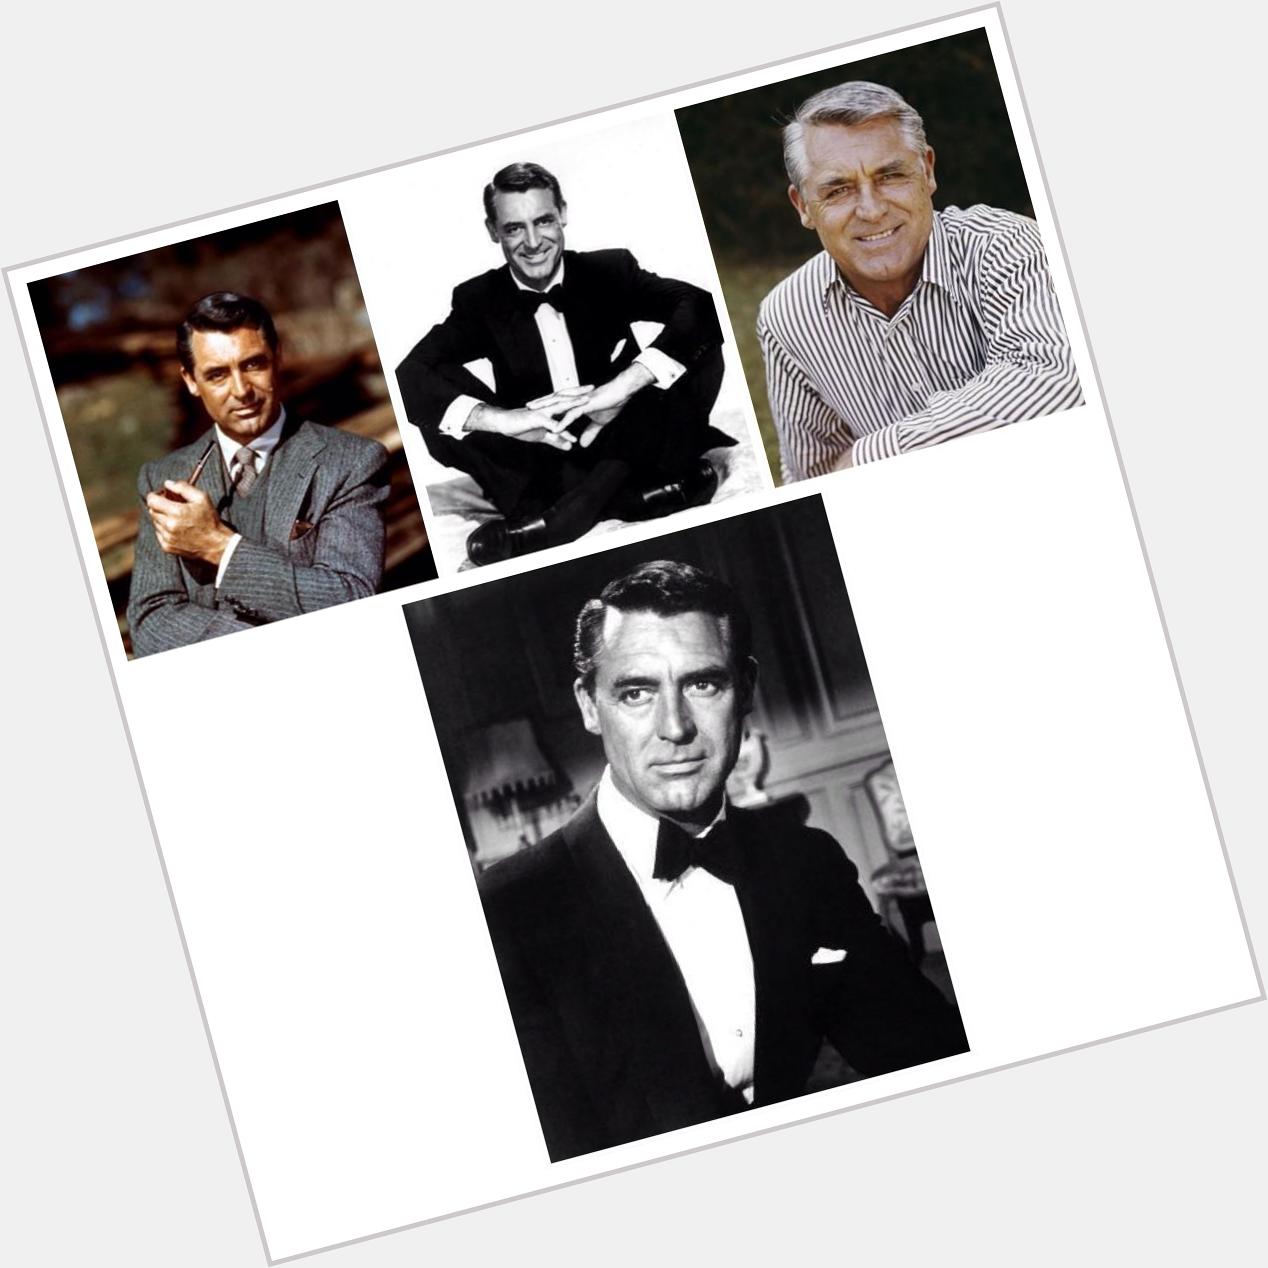 \" Happy birthday, Archibald Alexander Leach ( Cary Grant )  The one and only.     